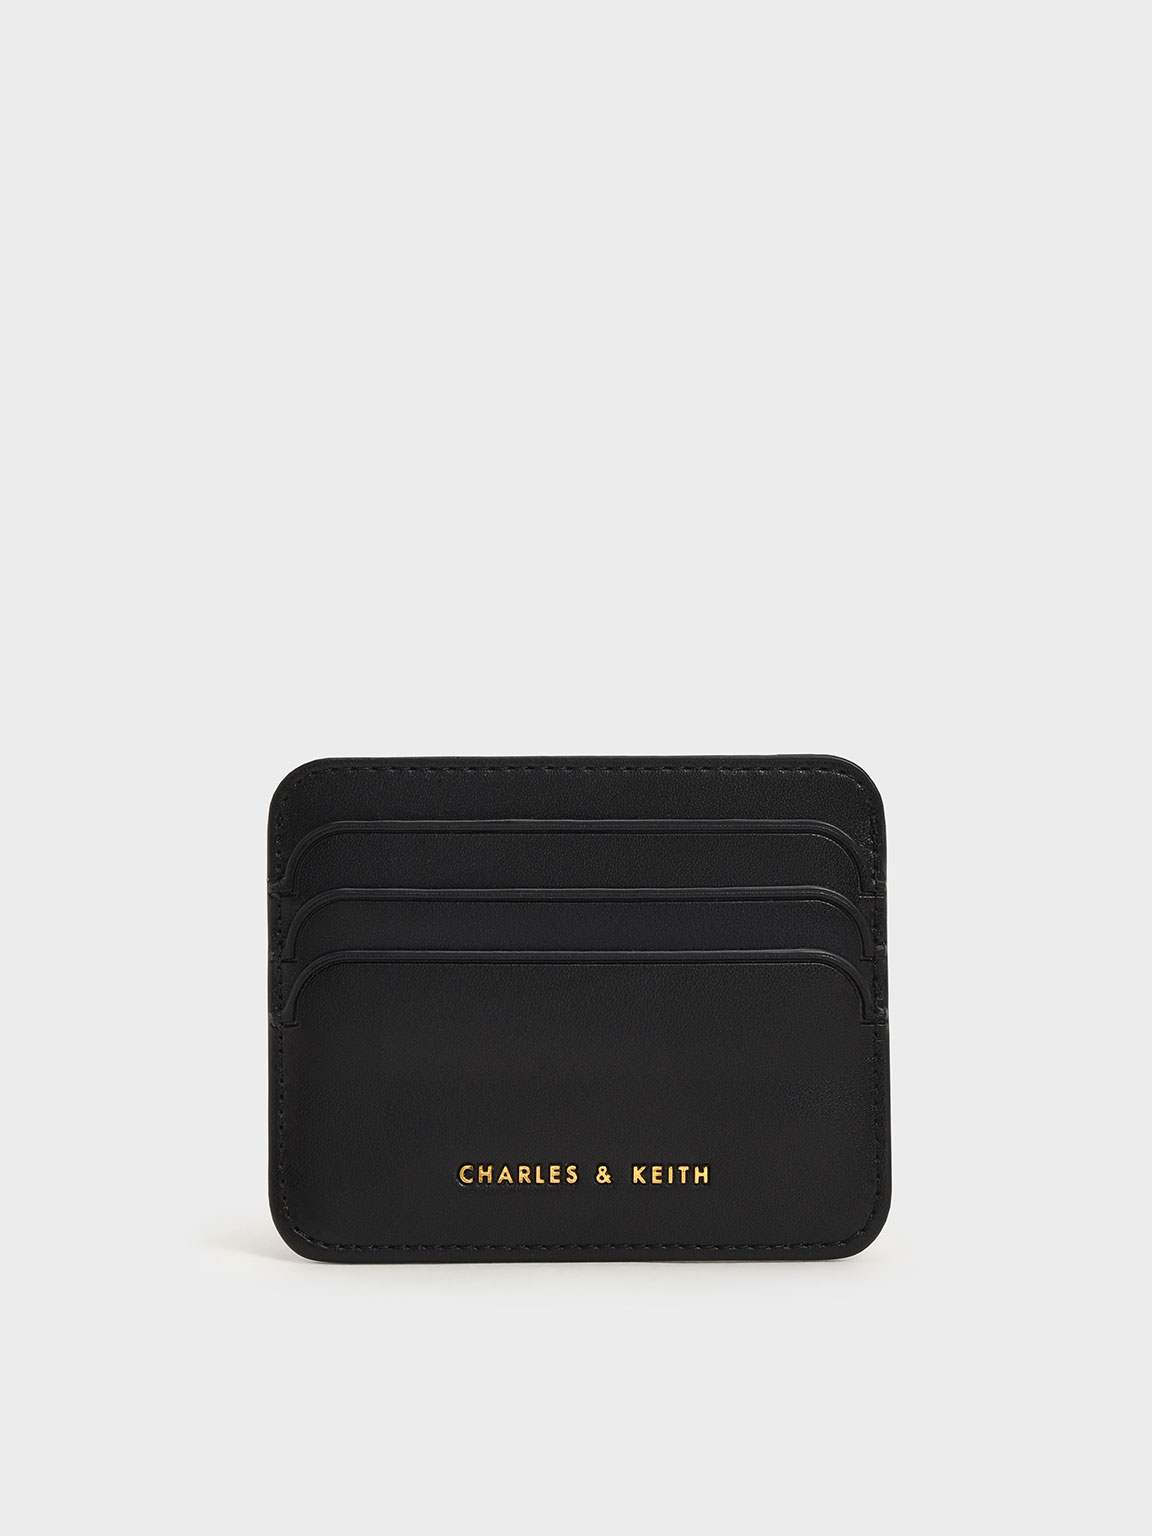 Charles & Keith Denim Multi-slot Card Holder in Black Womens Accessories Wallets and cardholders 